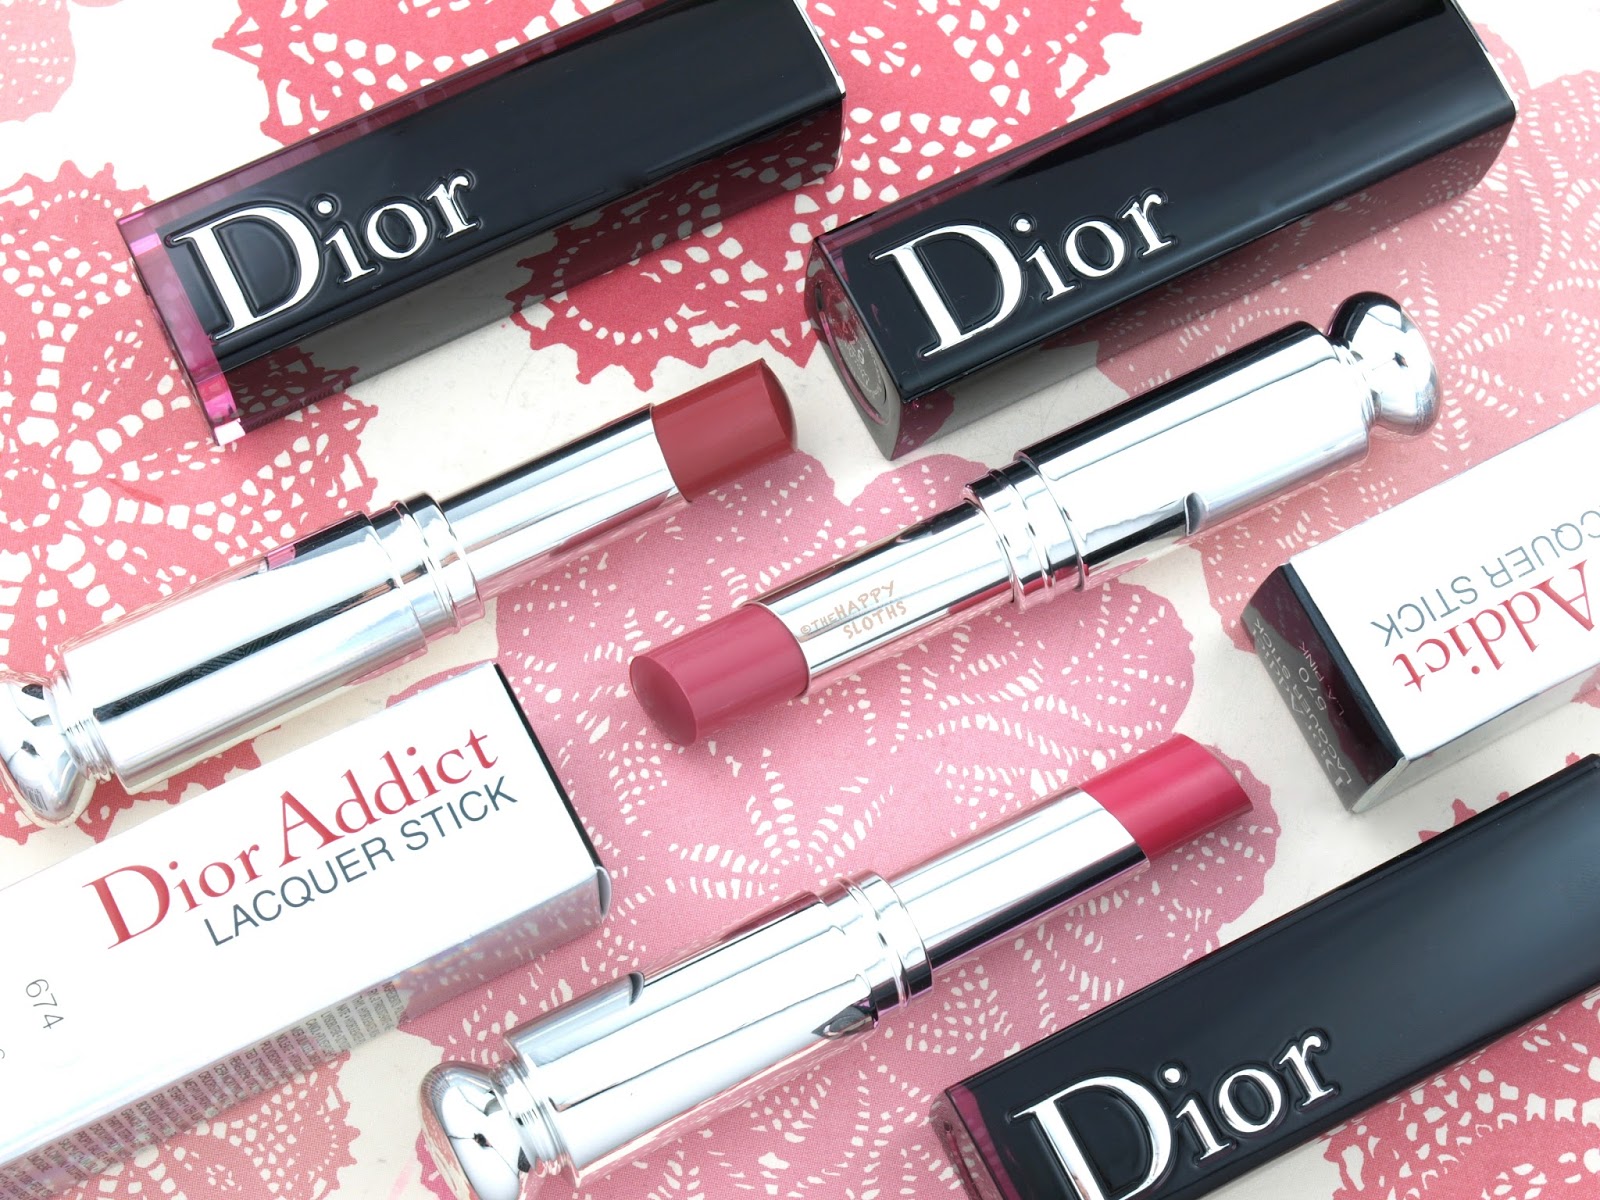 Dior Addict Lacquer Stick: Review and Swatches